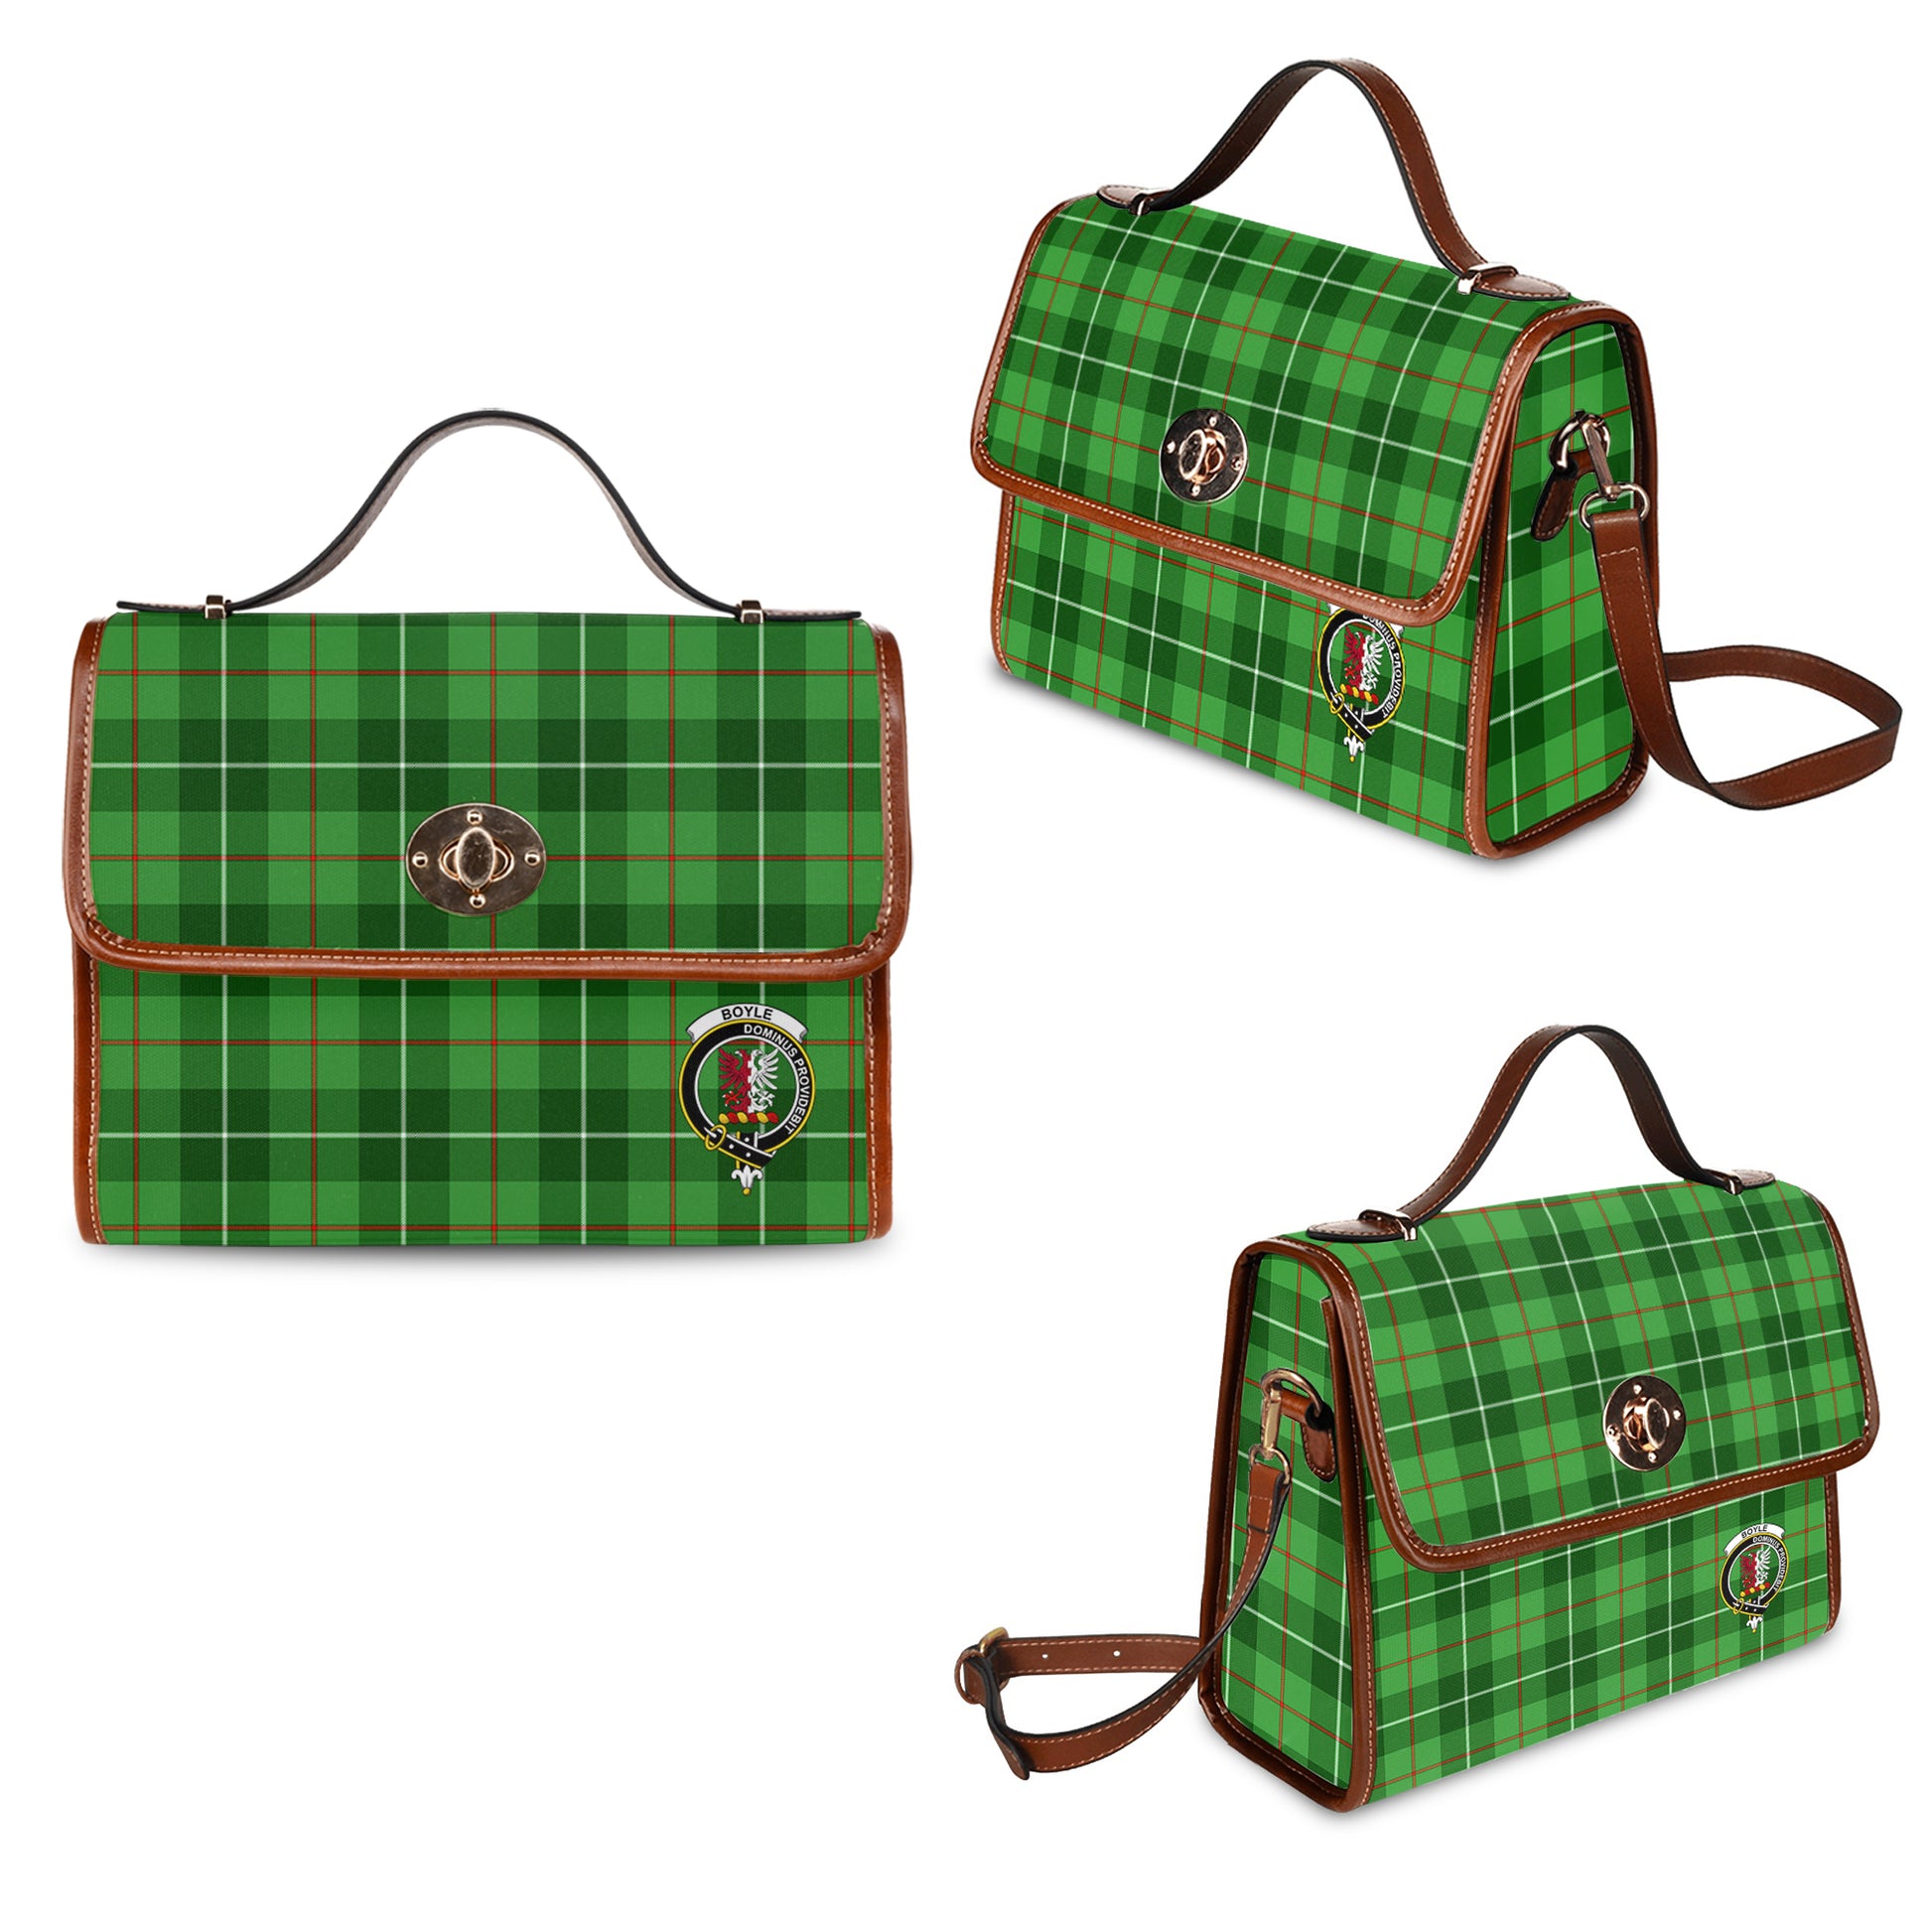 Boyle Tartan Leather Strap Waterproof Canvas Bag with Family Crest One Size 34cm * 42cm (13.4" x 16.5") - Tartanvibesclothing